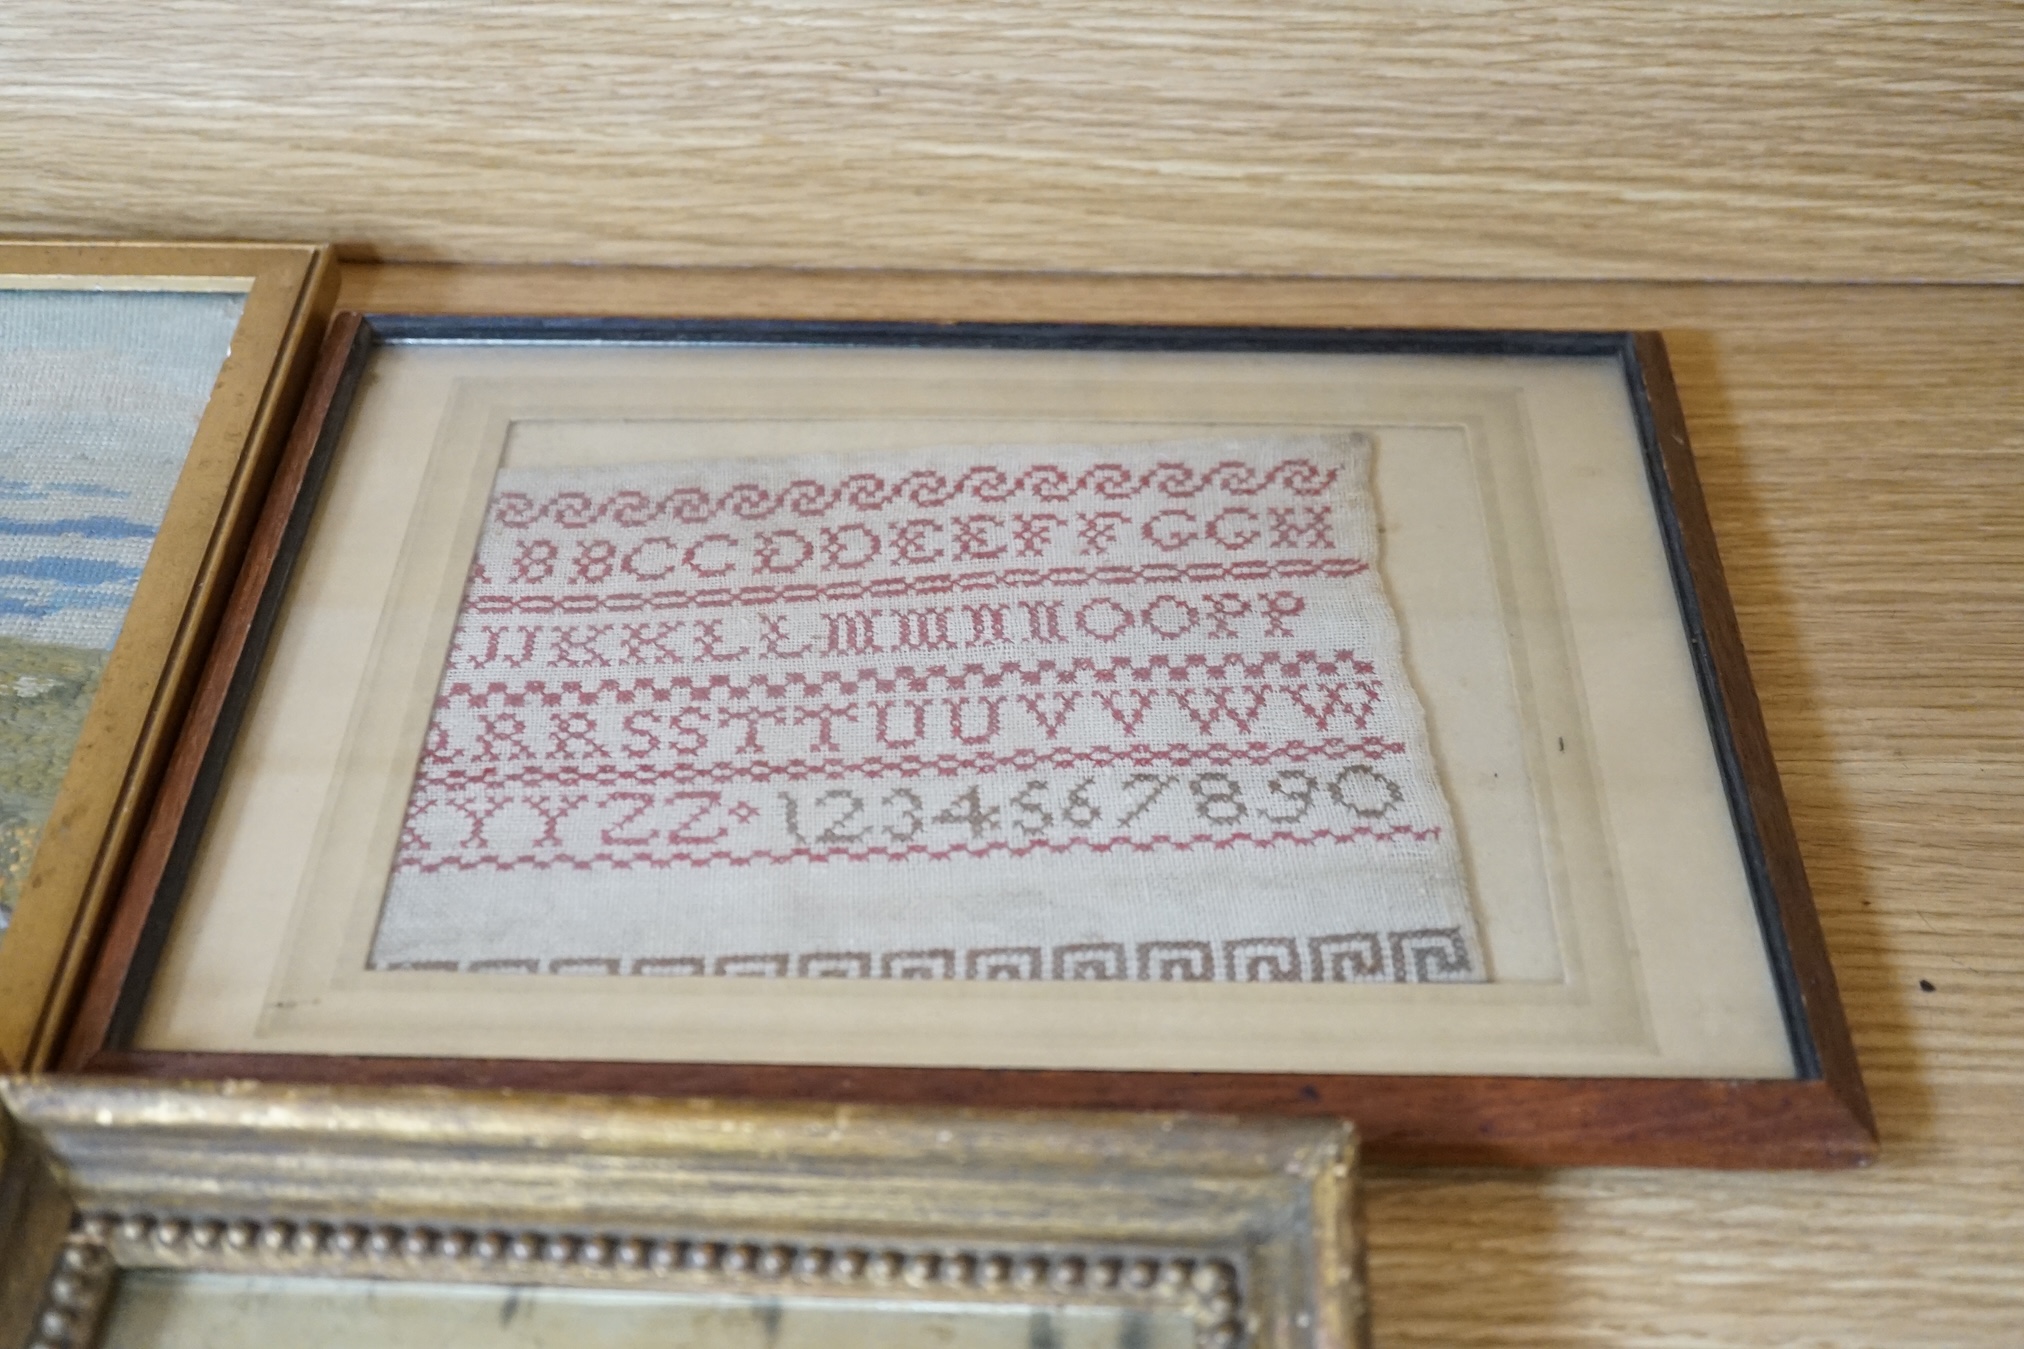 From the Studio of Fred Cuming. Six needlework embroideries including an alphabet sampler, Study of oak leaves, and 19th century landscapes, largest 23 x 29. Condition - varies, poor to fair